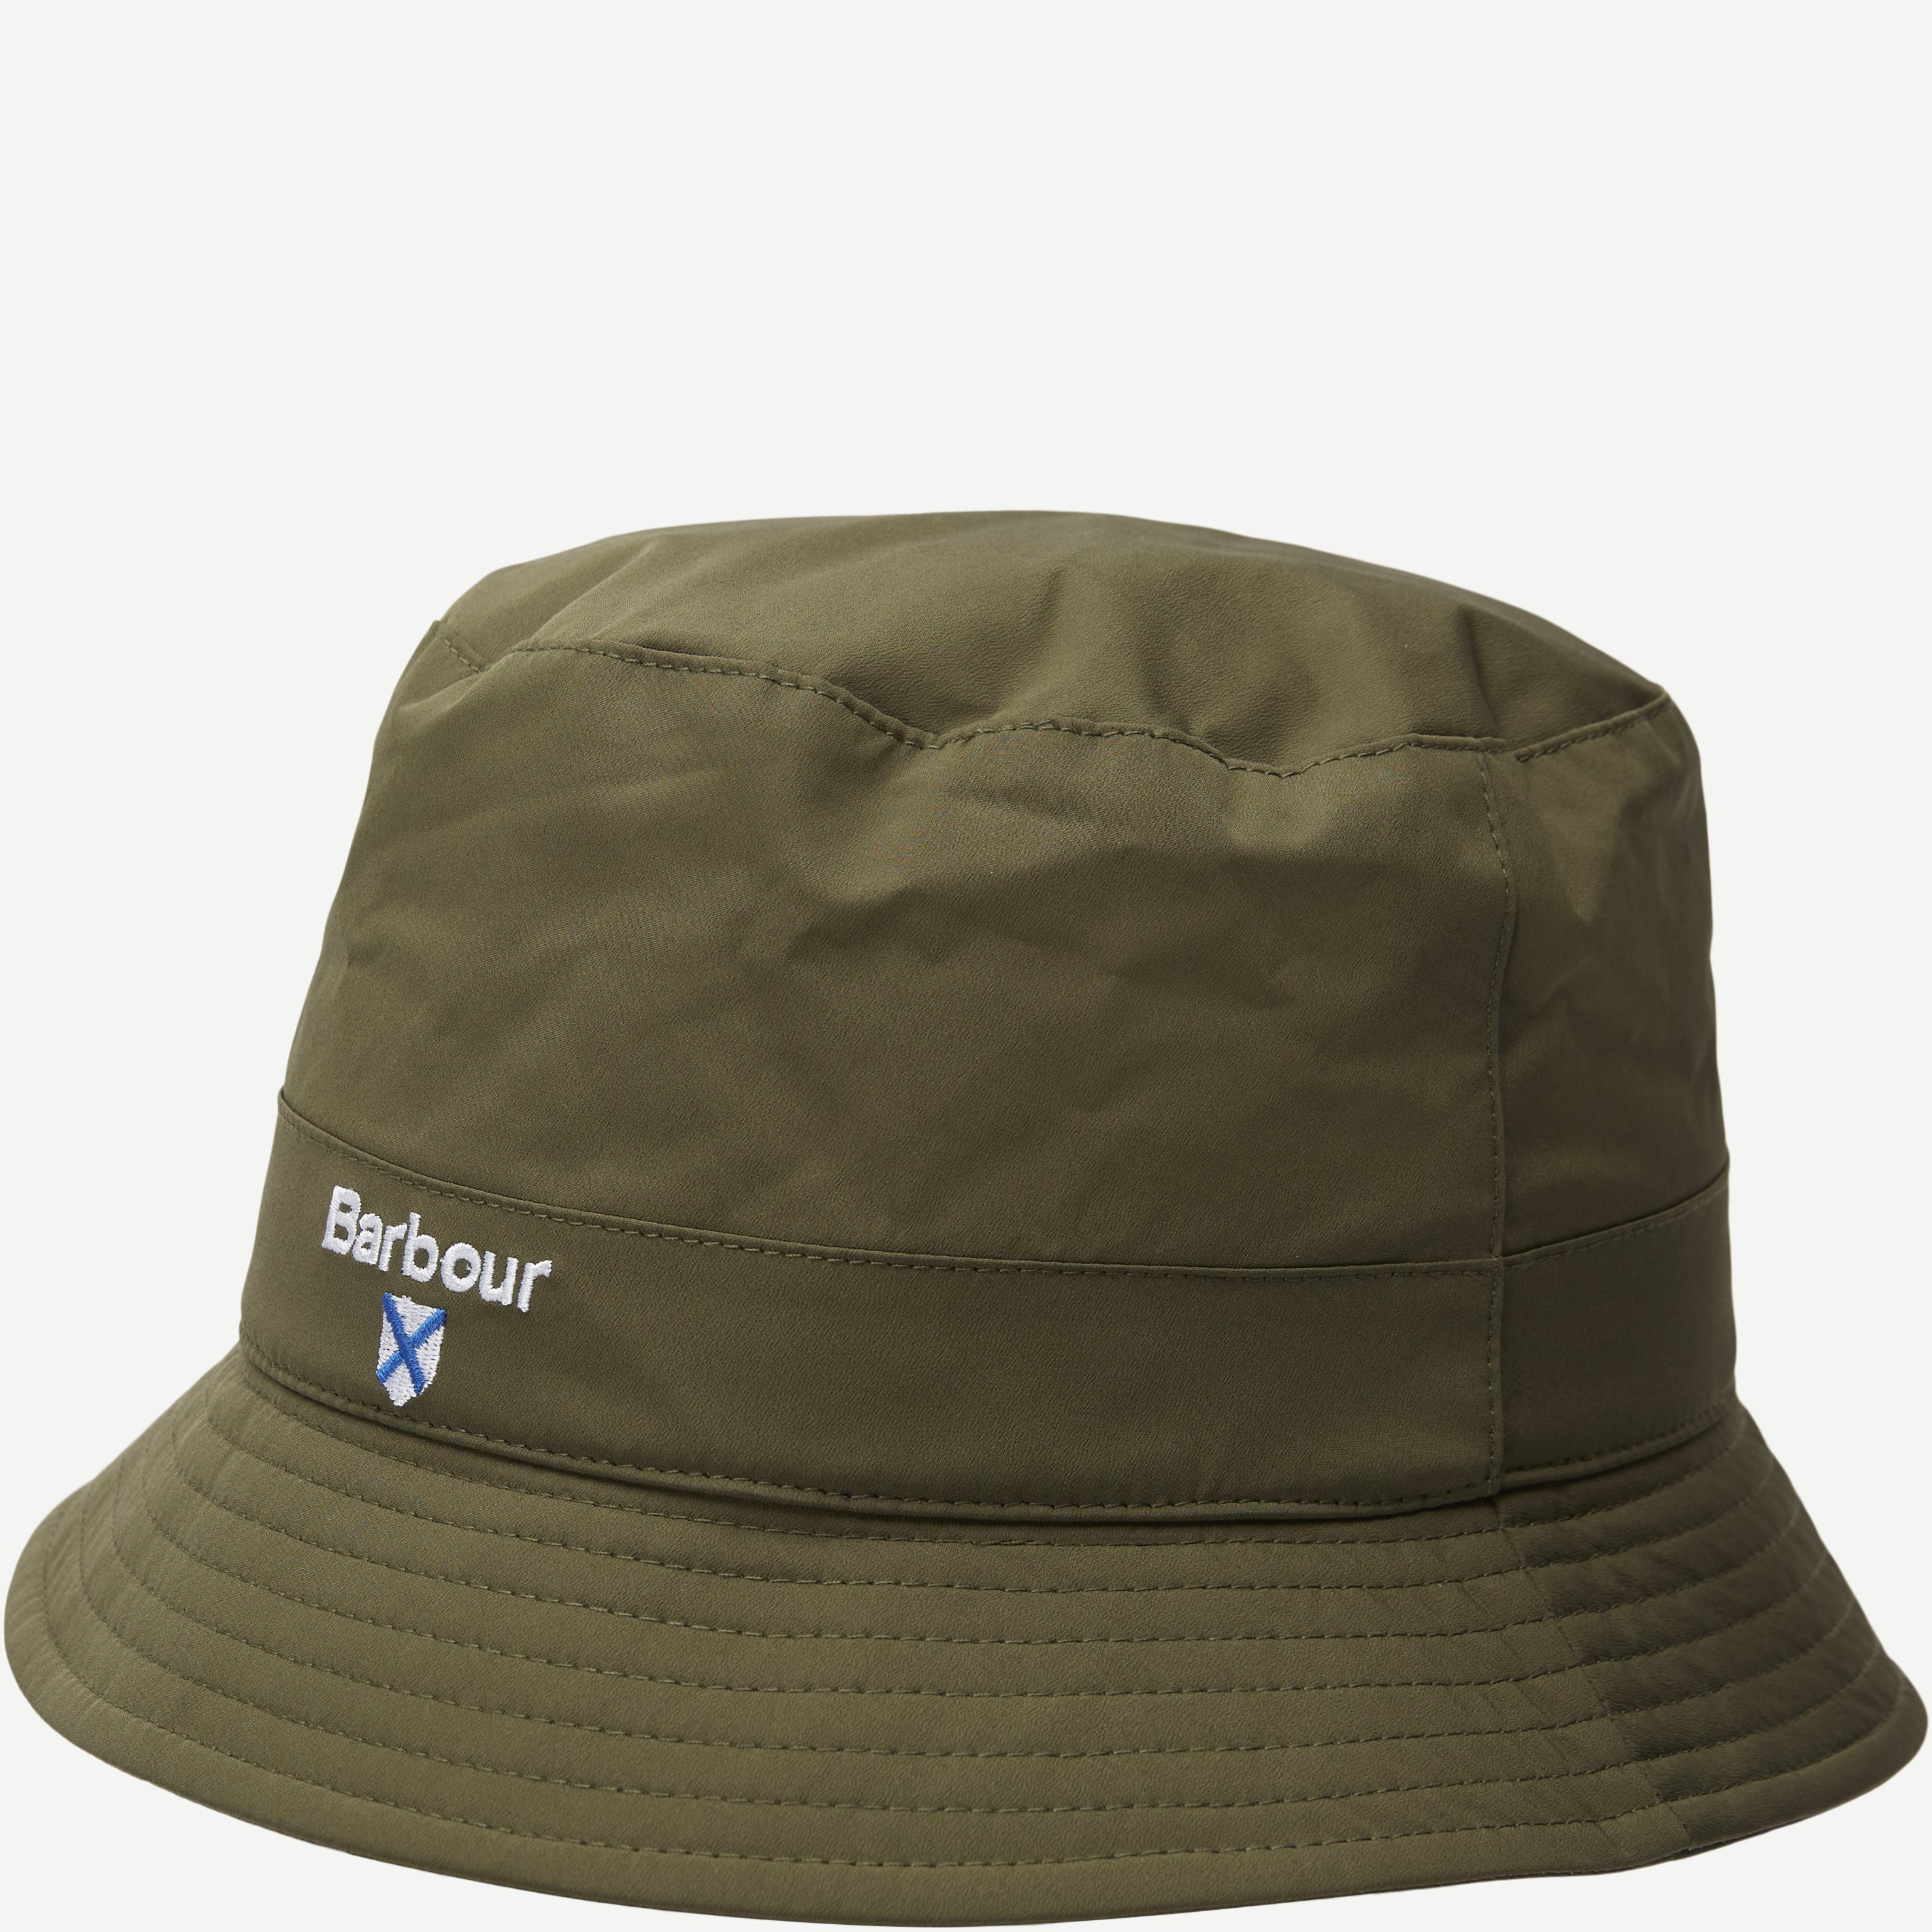 Barbour Caps CREST MHA0678 Army